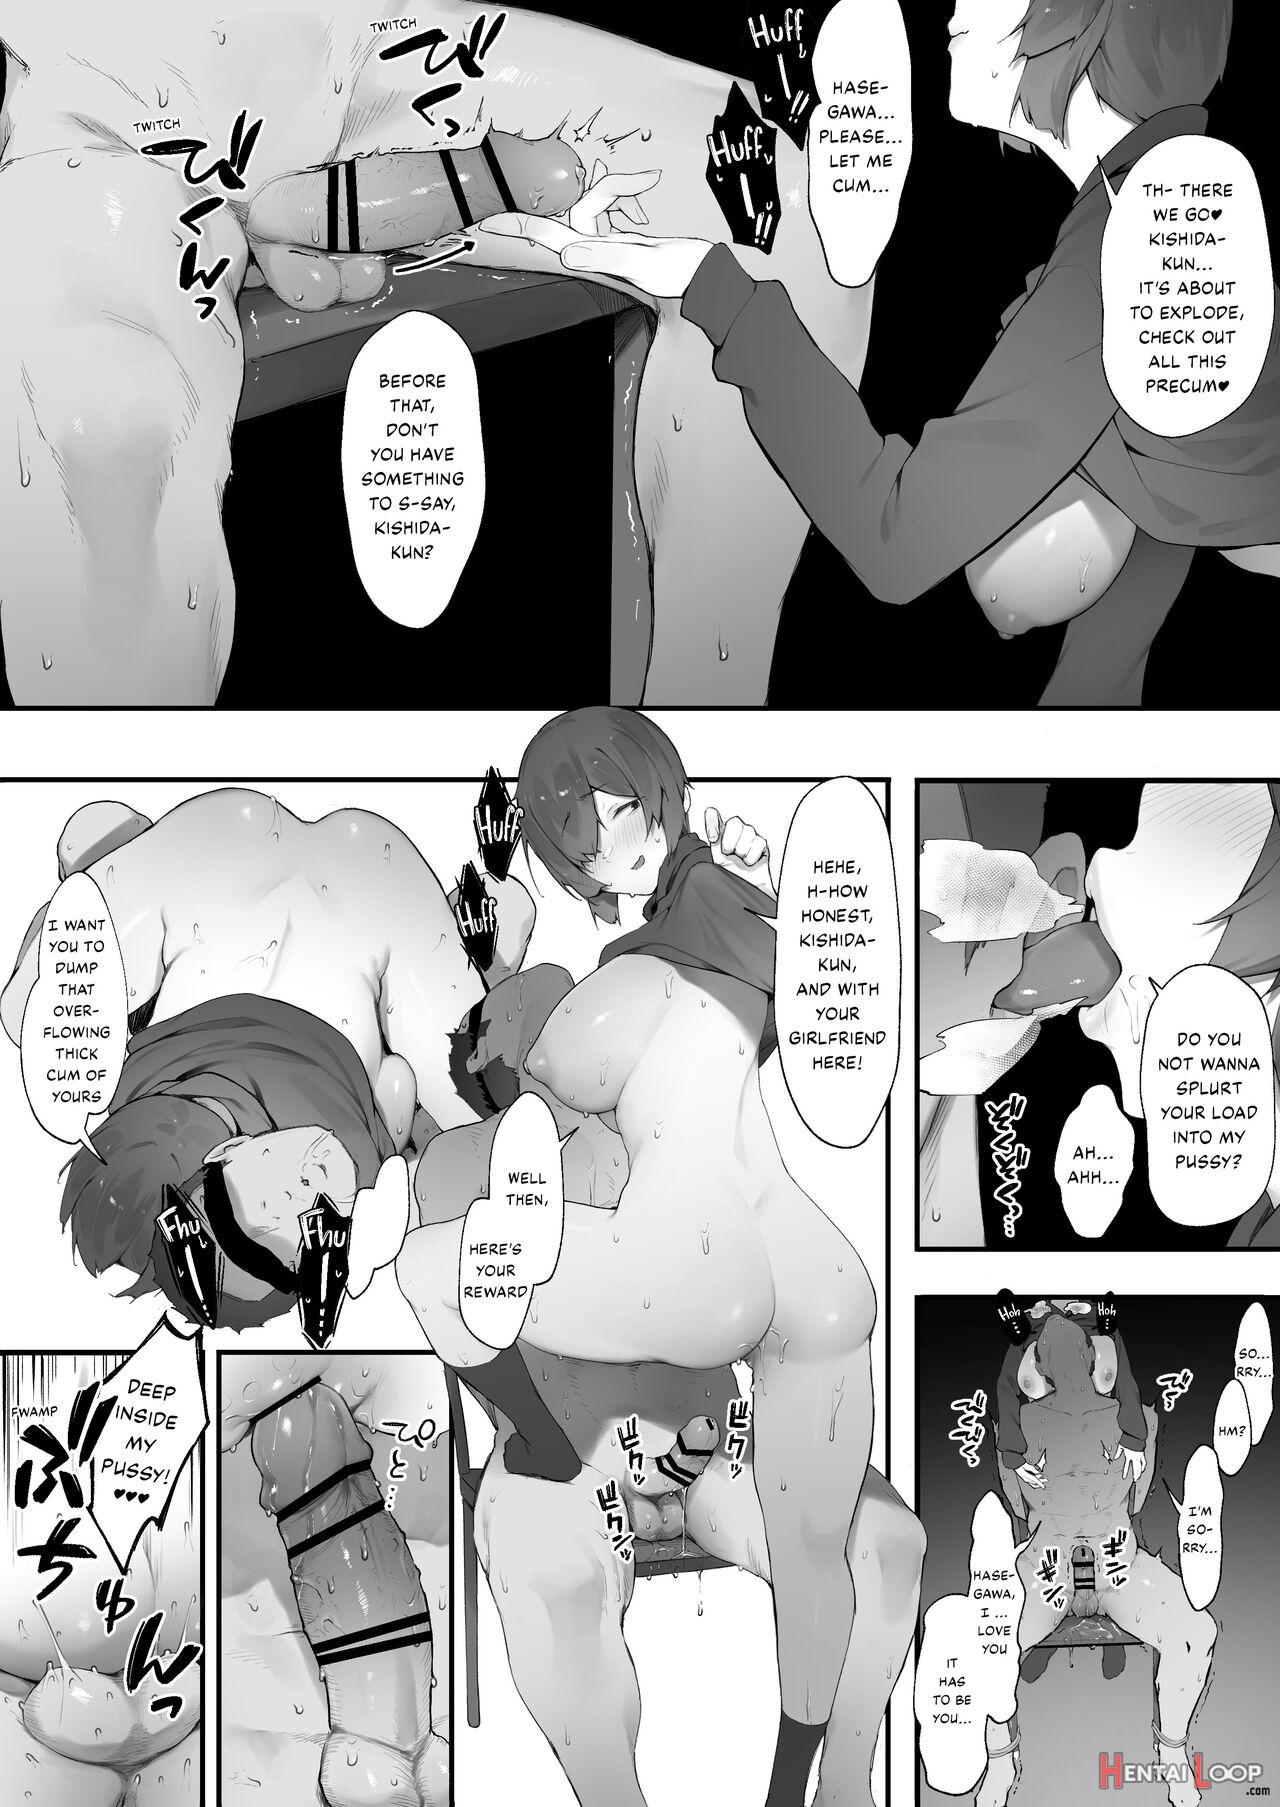 Love Life As A Loner Finally Blossoming!? / Part3 page 5